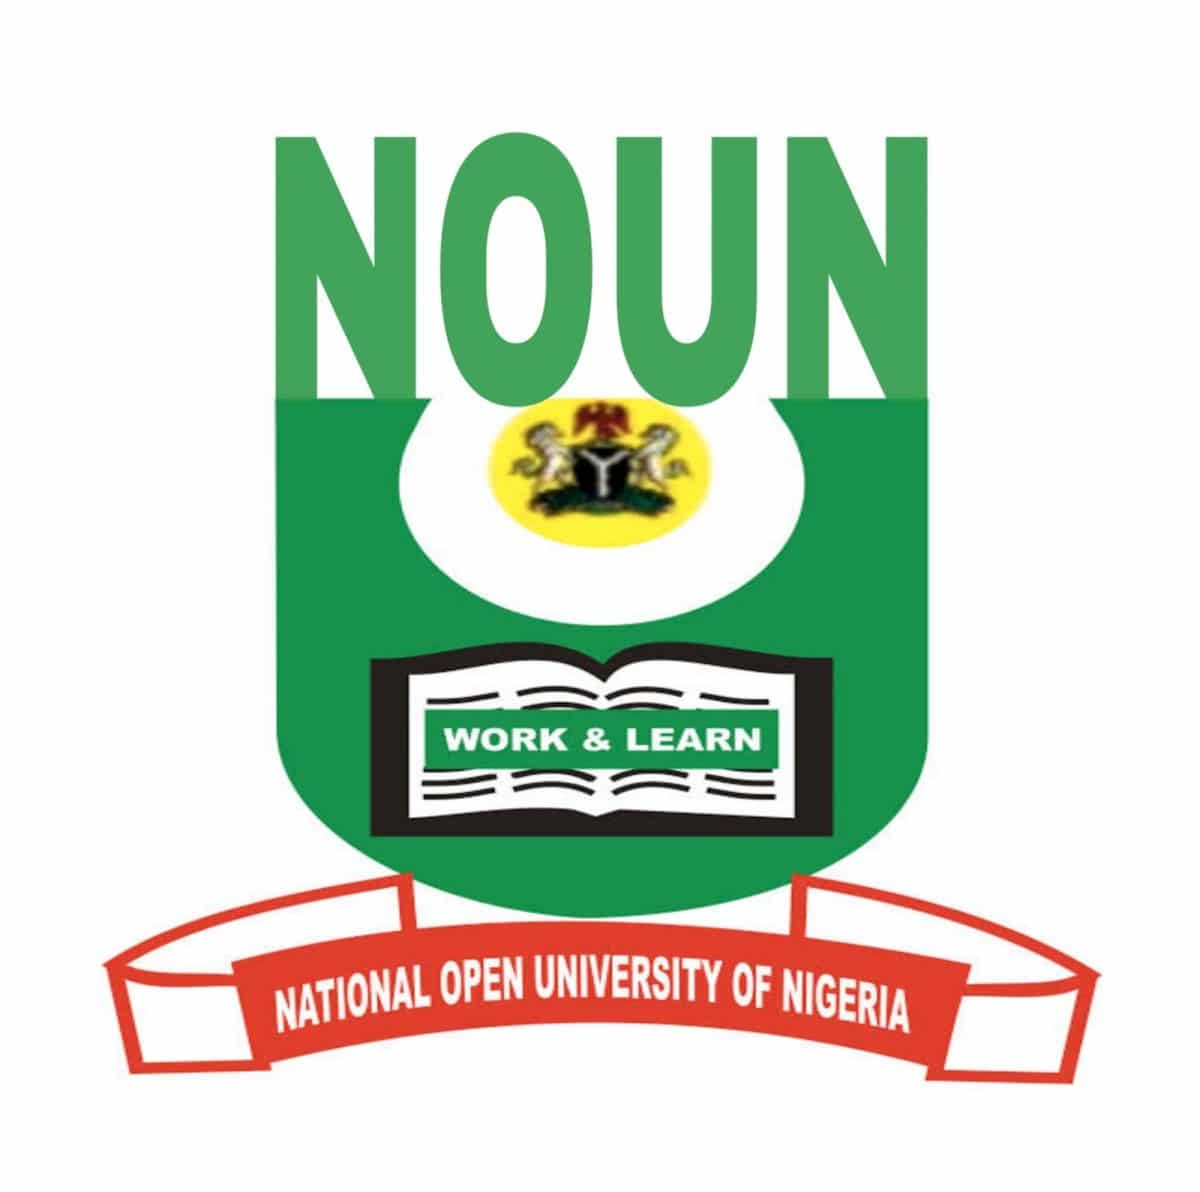 education courses in national open university of nigeria